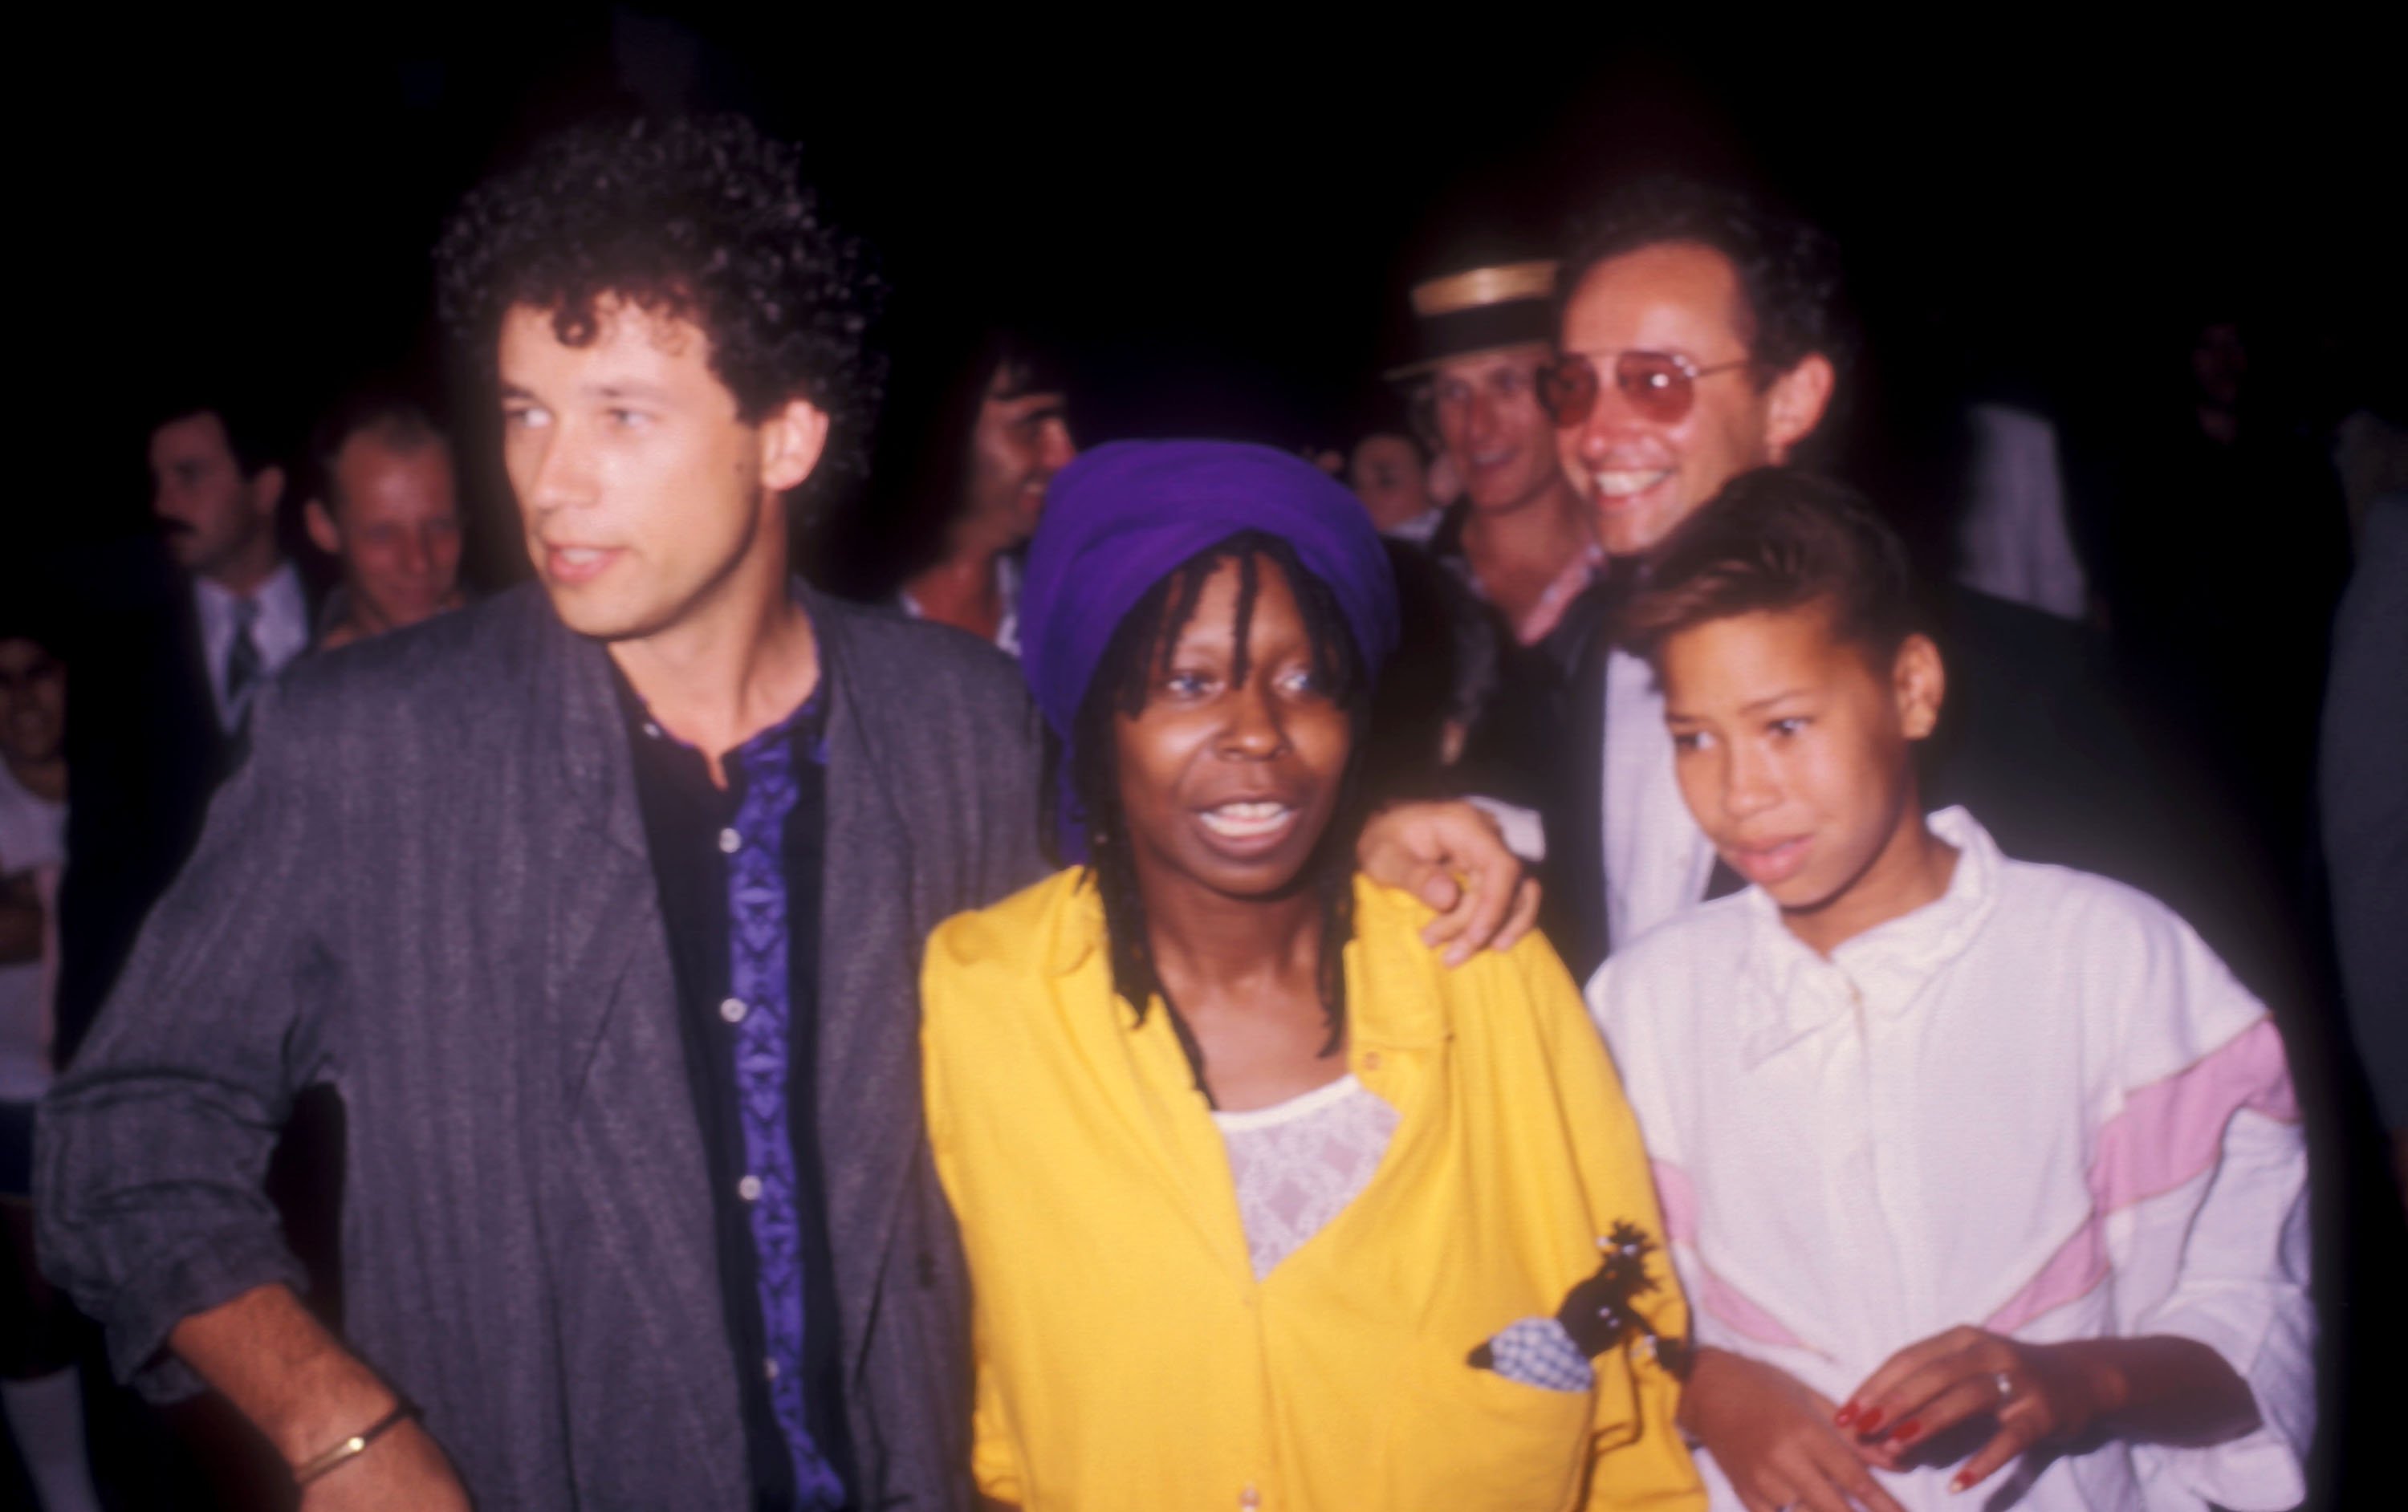 Whoopi Goldberg with daughter Alex Martin and guests during Whoopi Goldberg wedding reception  September 7, 1986 in Los Angeles, California ┃Source: Getty Images